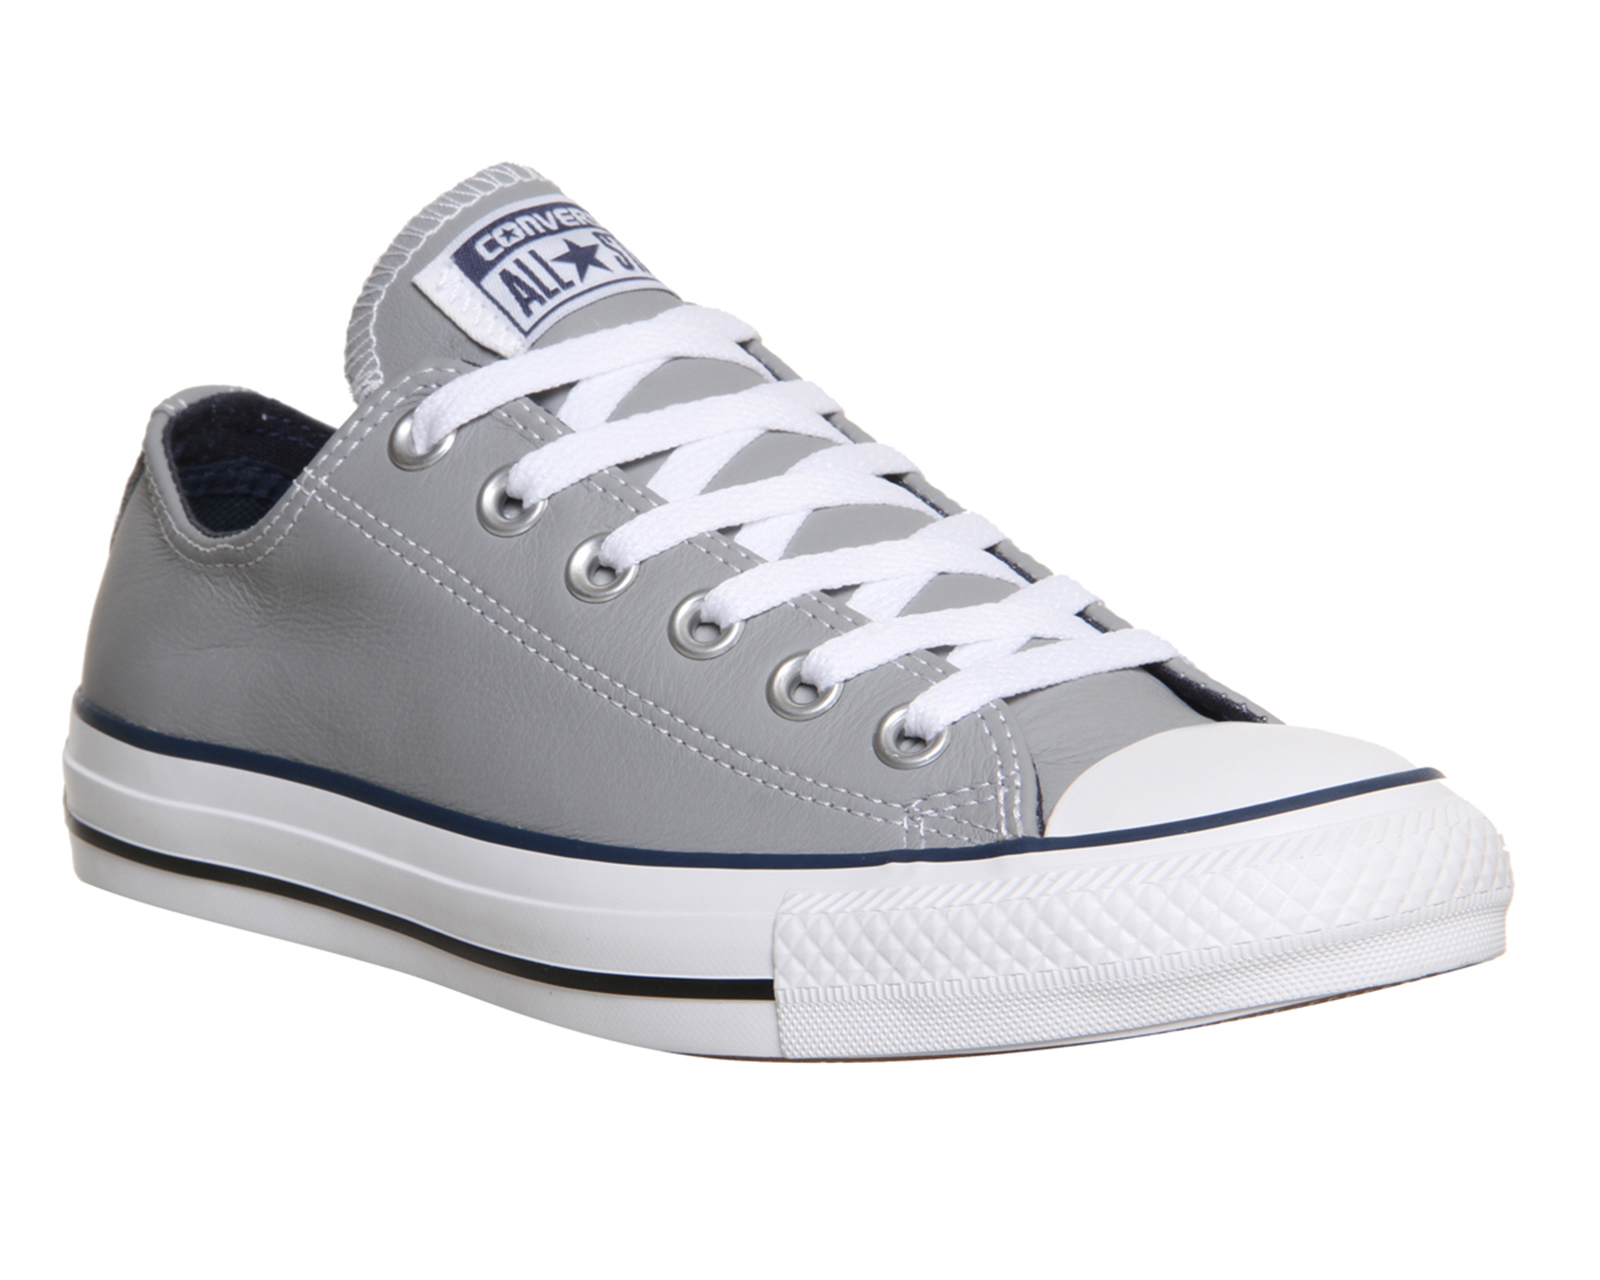 womens grey converse shoes